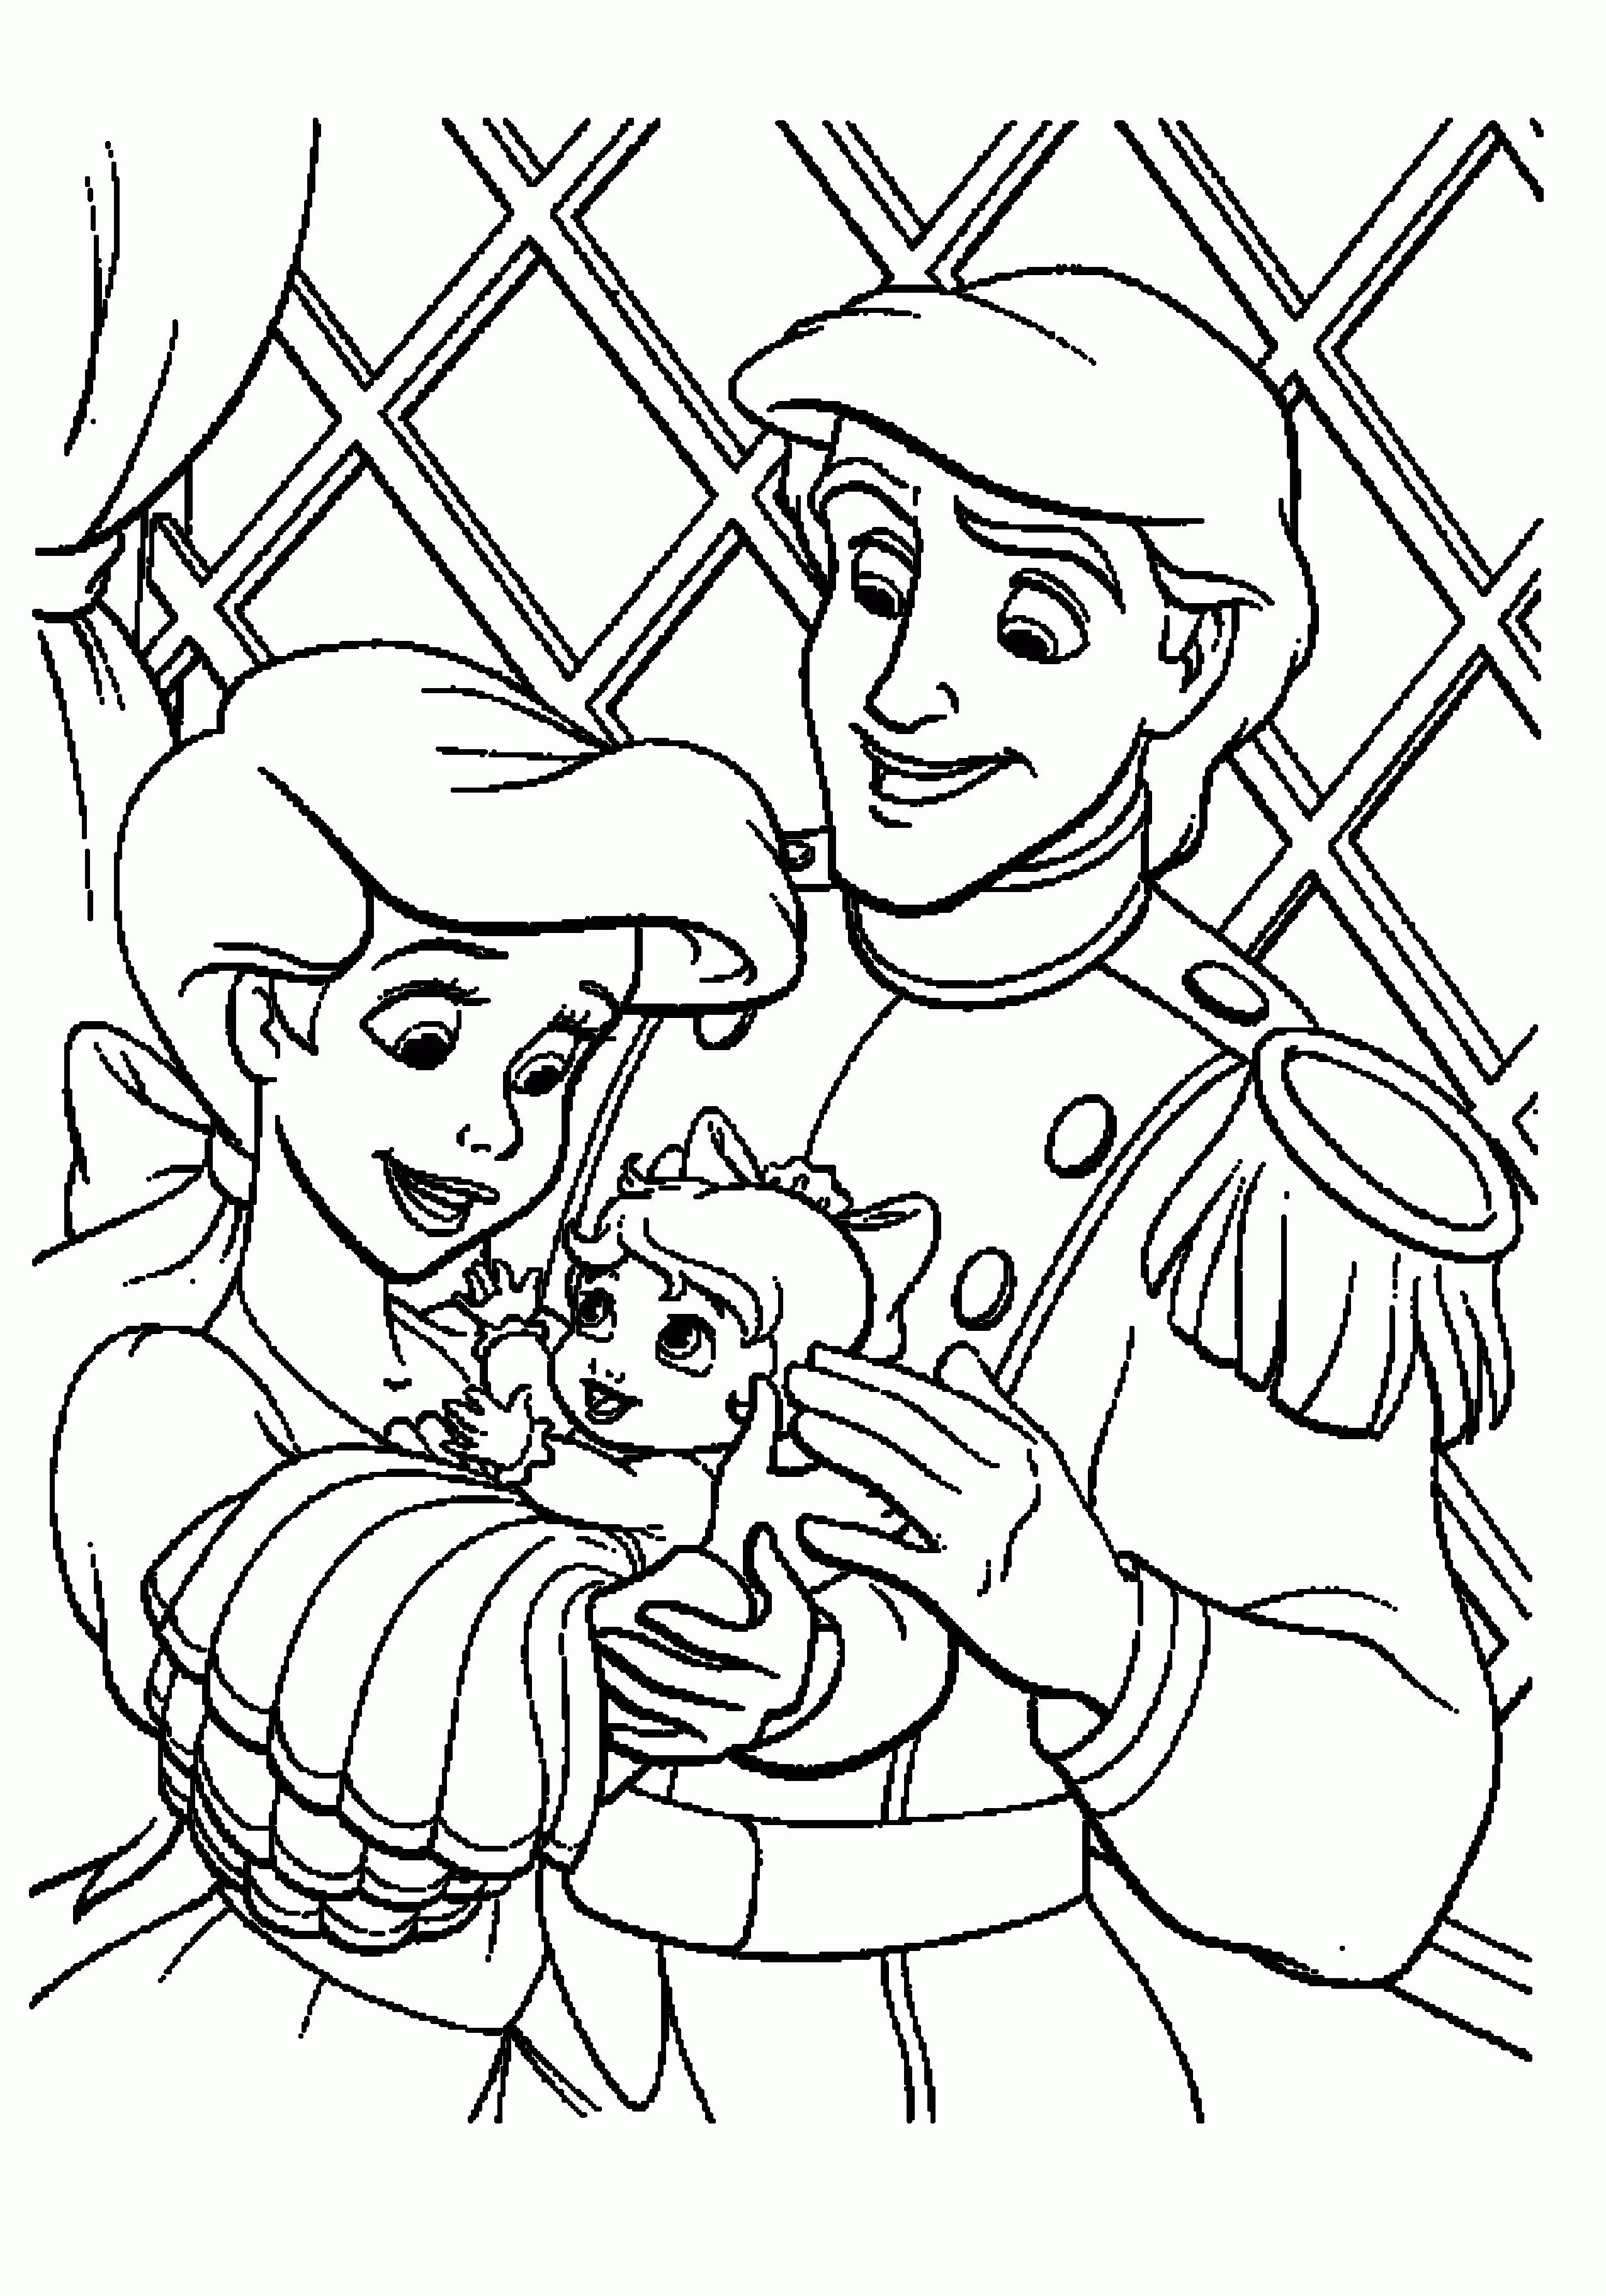 Coloring Pages Of Little Mermaid The Little Mermaid Coloring Pages Ariel And Eric Printable Kids